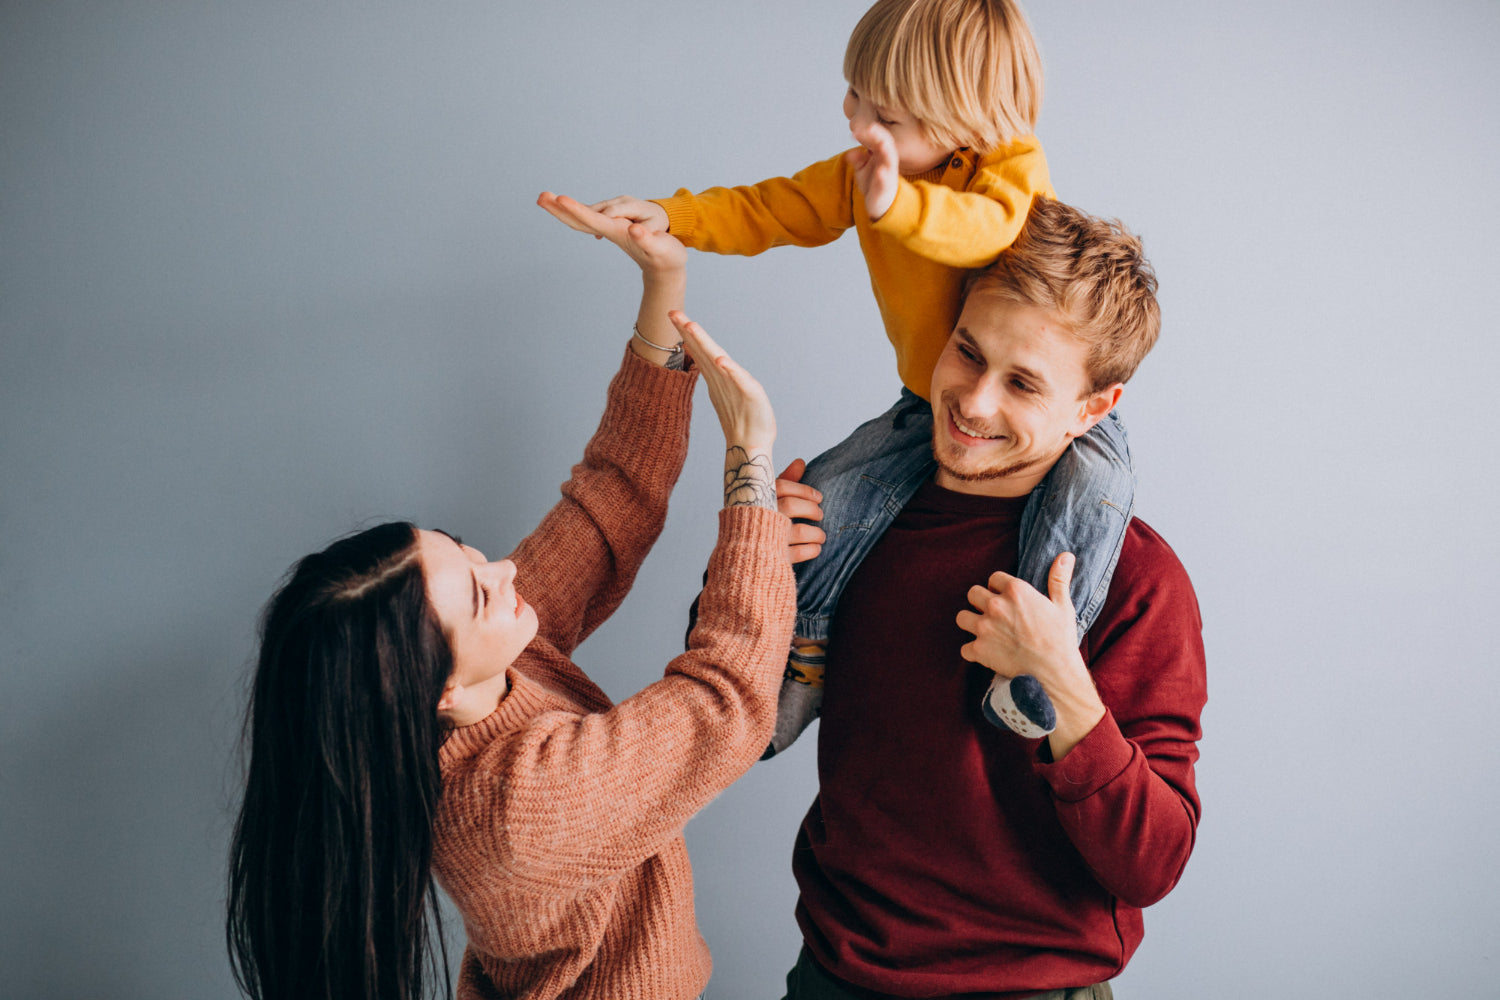 Photo of parents high fiving child to illustrate strategies for youth emotional support